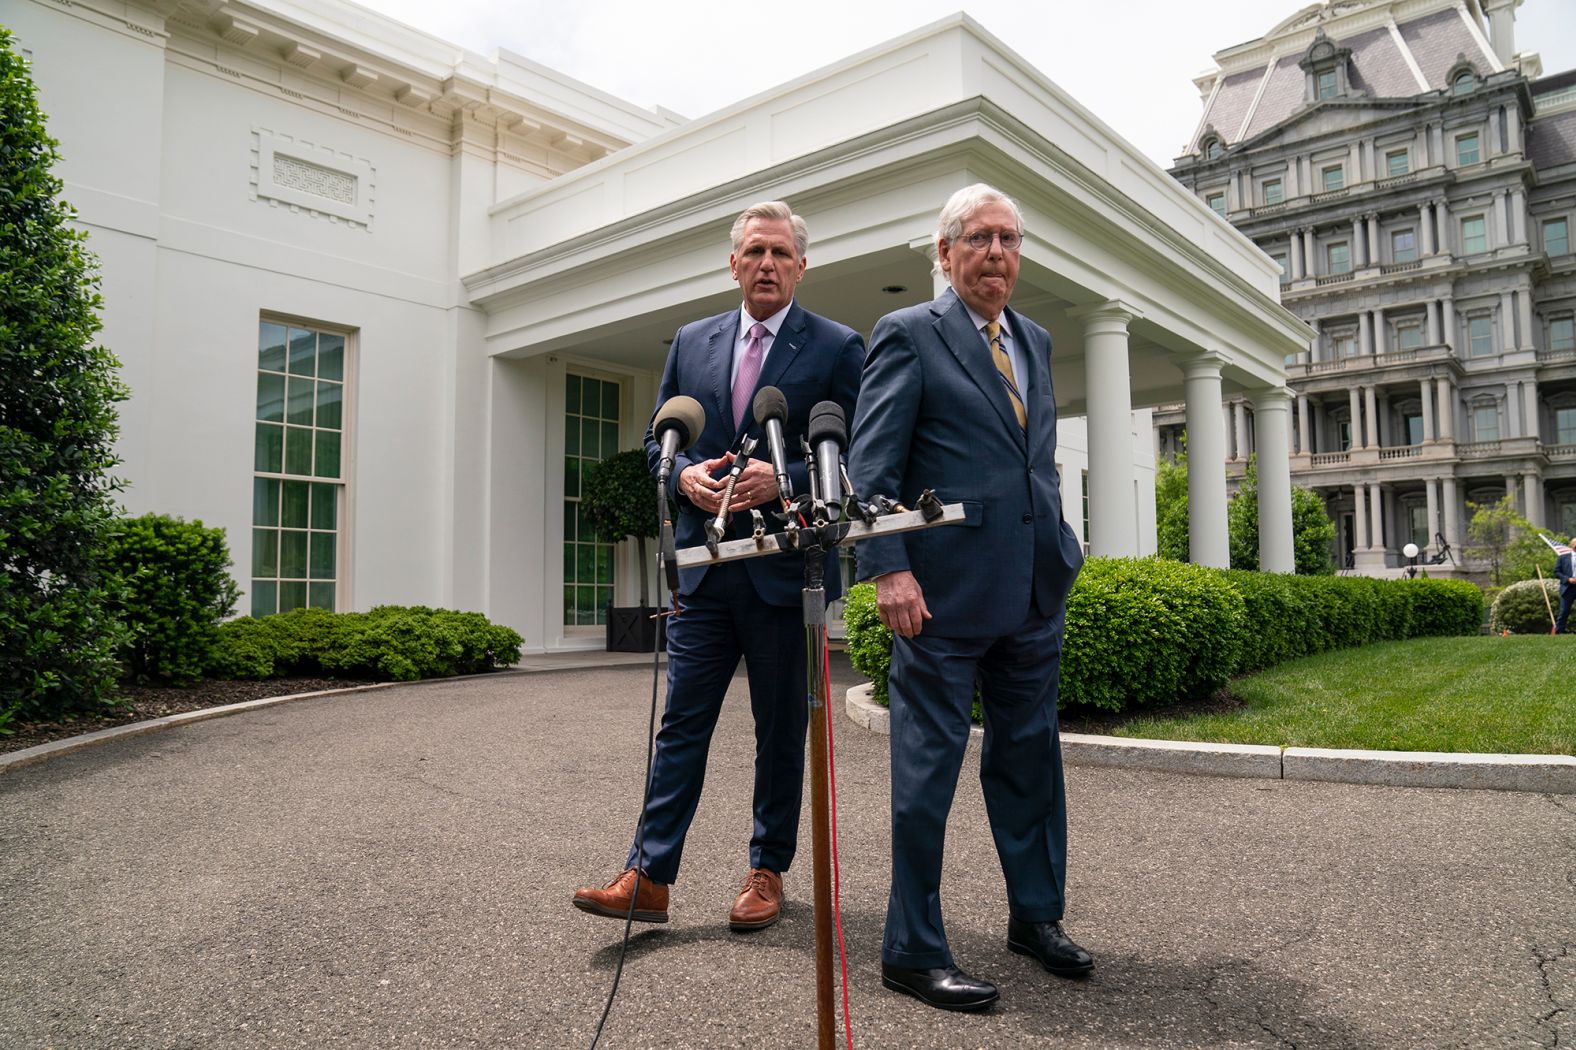 McConnell and House Minority Leader Kevin McCarthy speak to reporters outside the White House after meeting with President Joe Biden in May 2021.